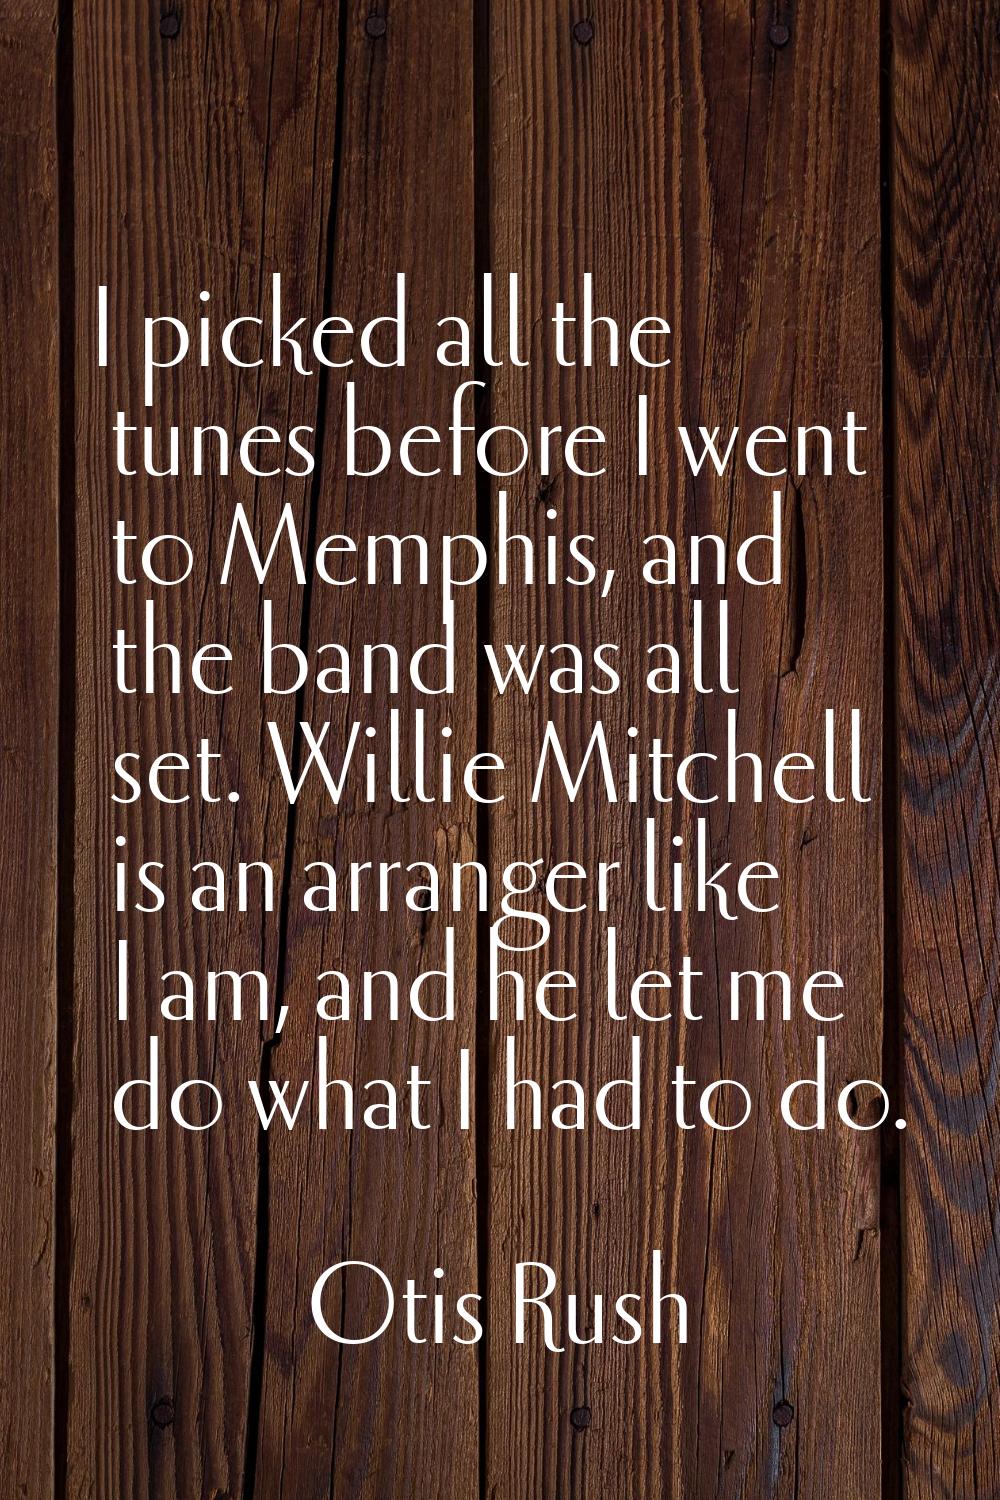 I picked all the tunes before I went to Memphis, and the band was all set. Willie Mitchell is an ar